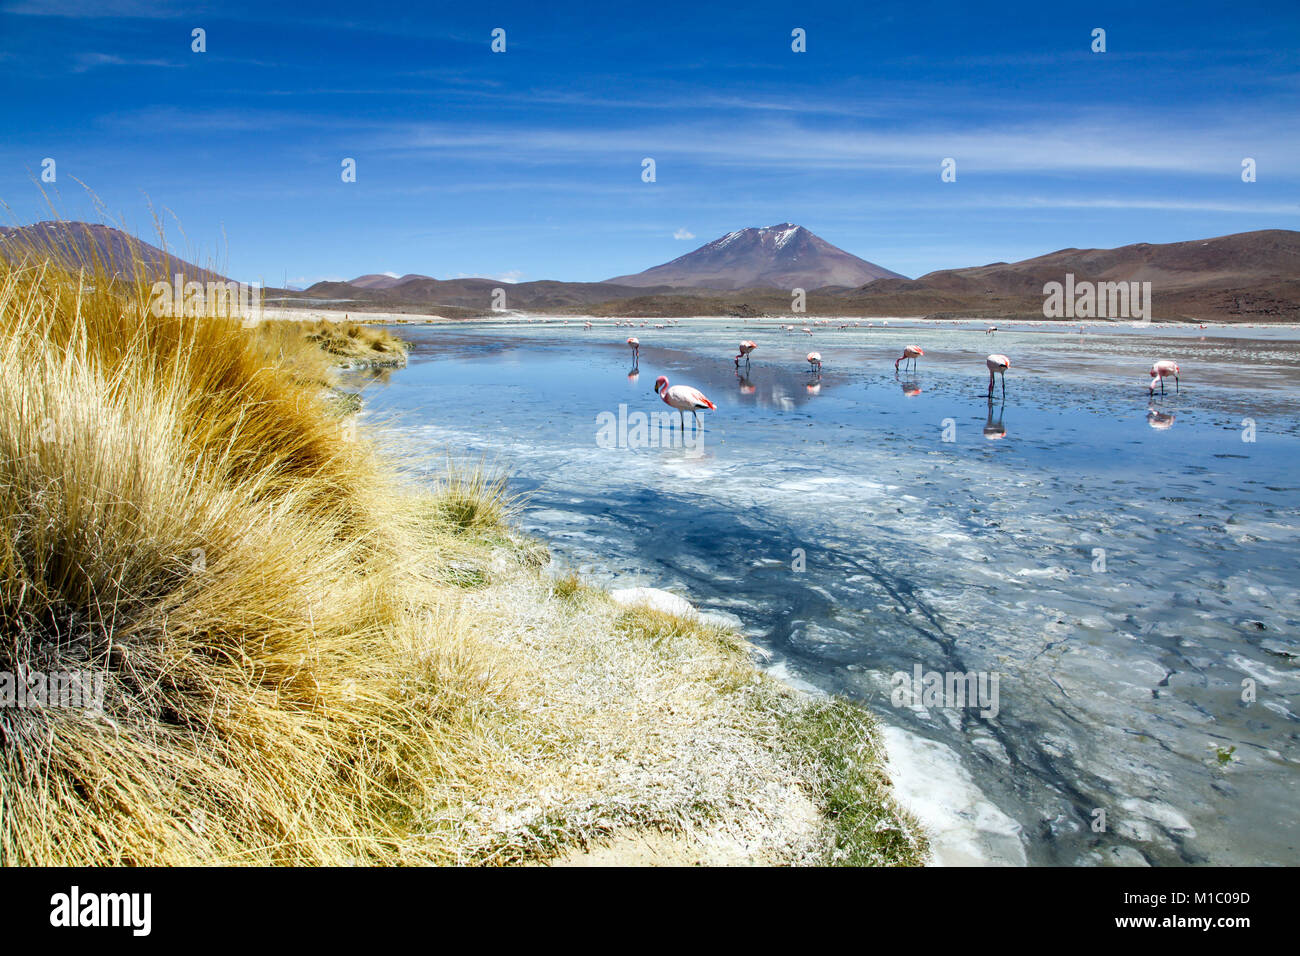 Sur L’pez or Sud L’pez Province, Altiplano of Bolivia, 2011: Laguna Hedionda, lake with its James's flamingos (or puna flamingos) and its rocky and mo Stock Photo